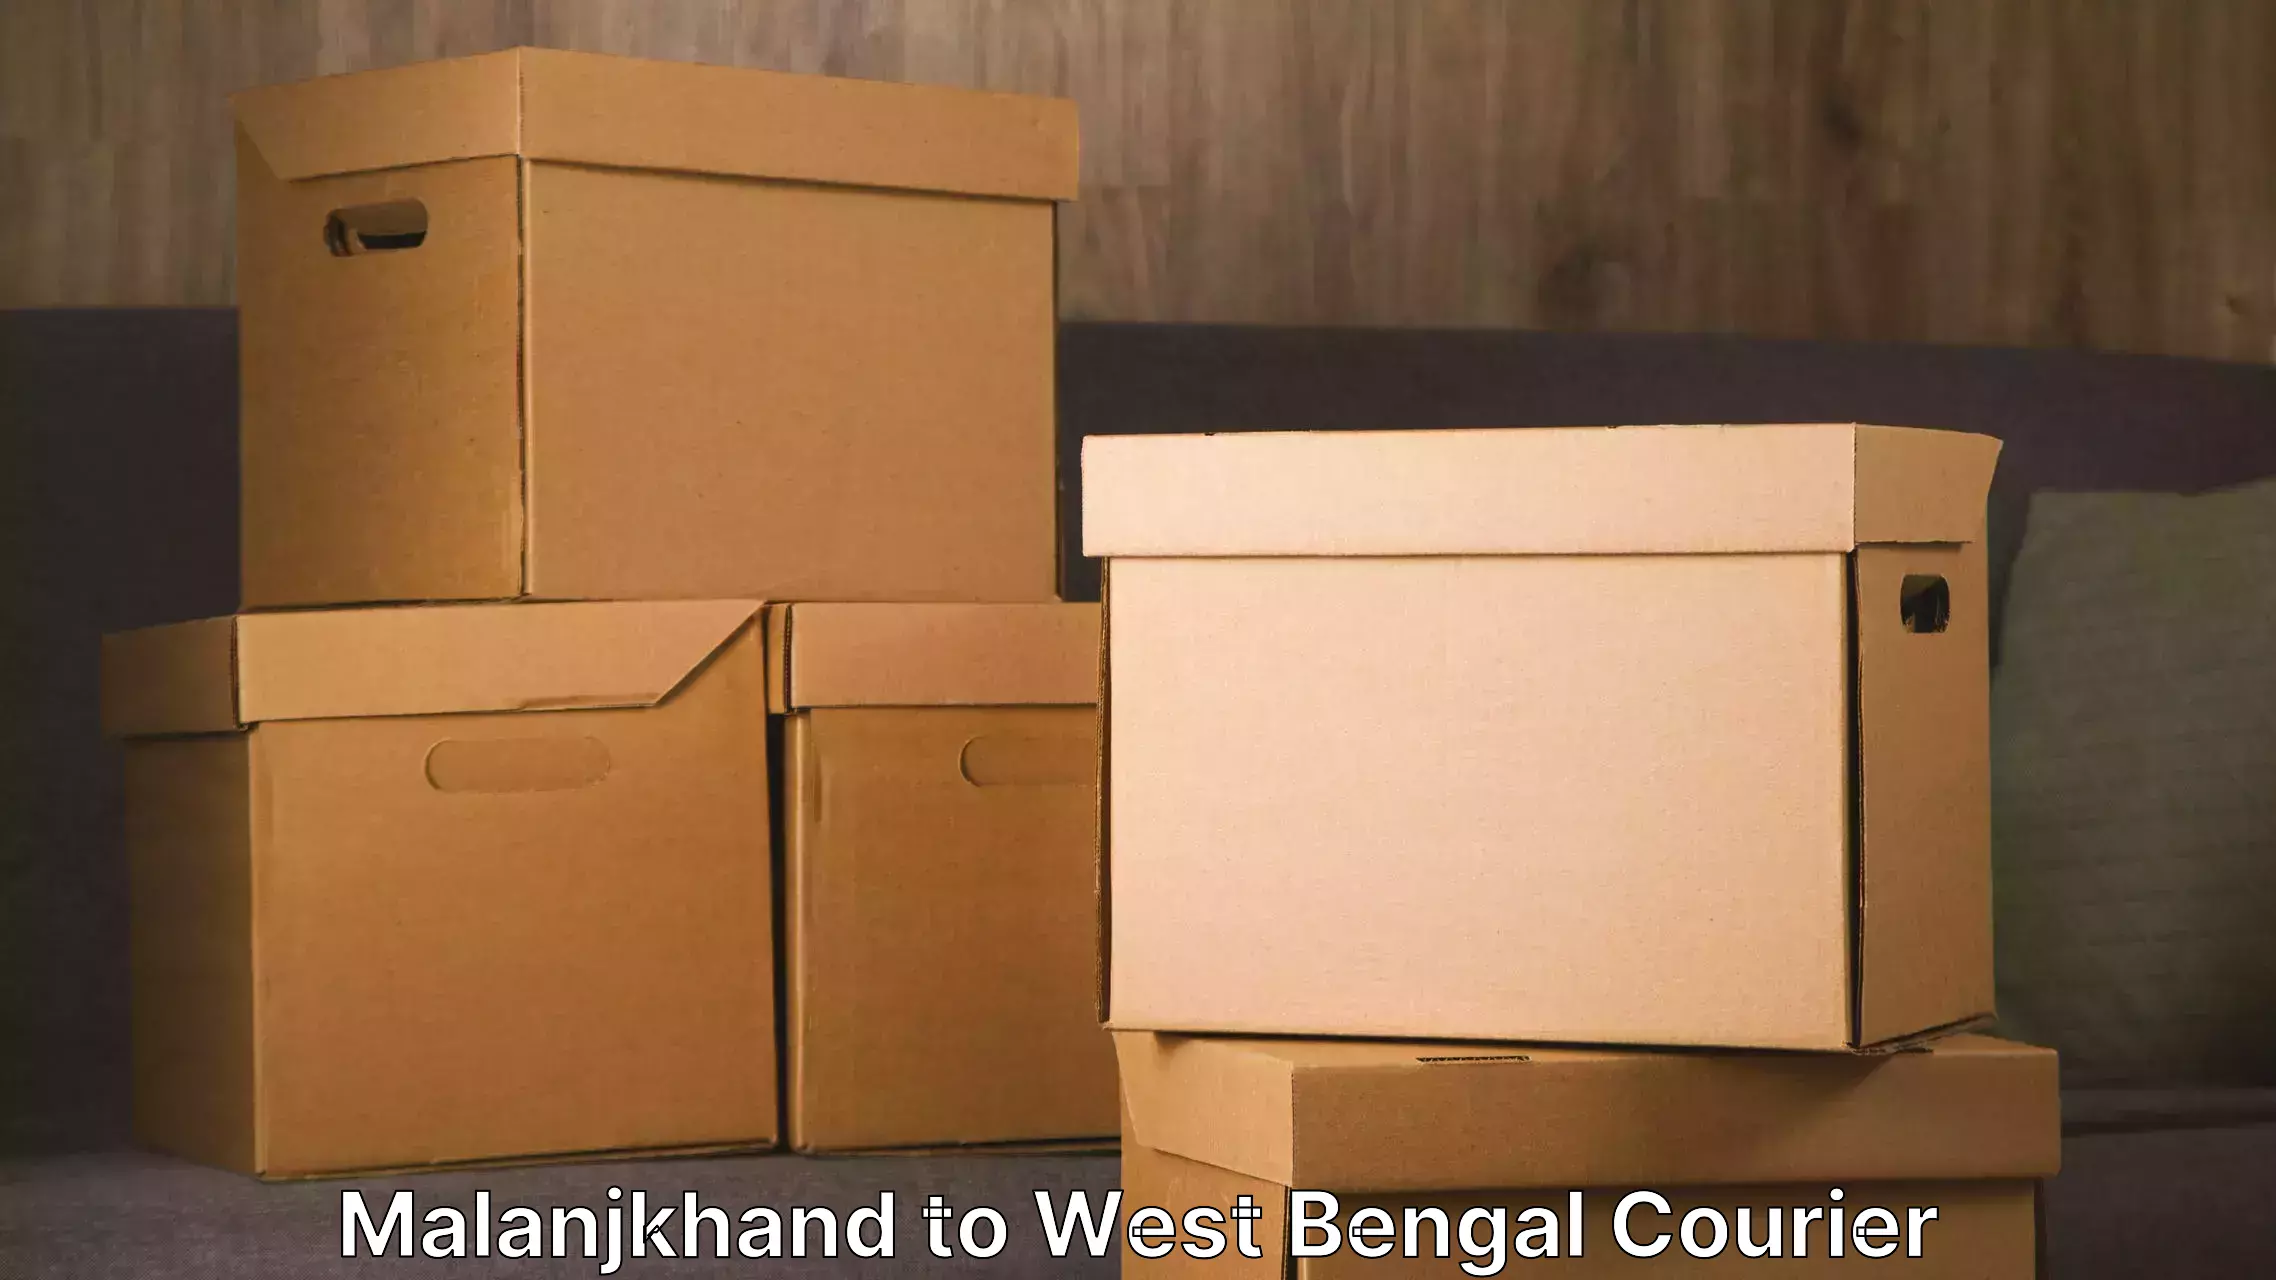 Trusted relocation experts Malanjkhand to West Bengal